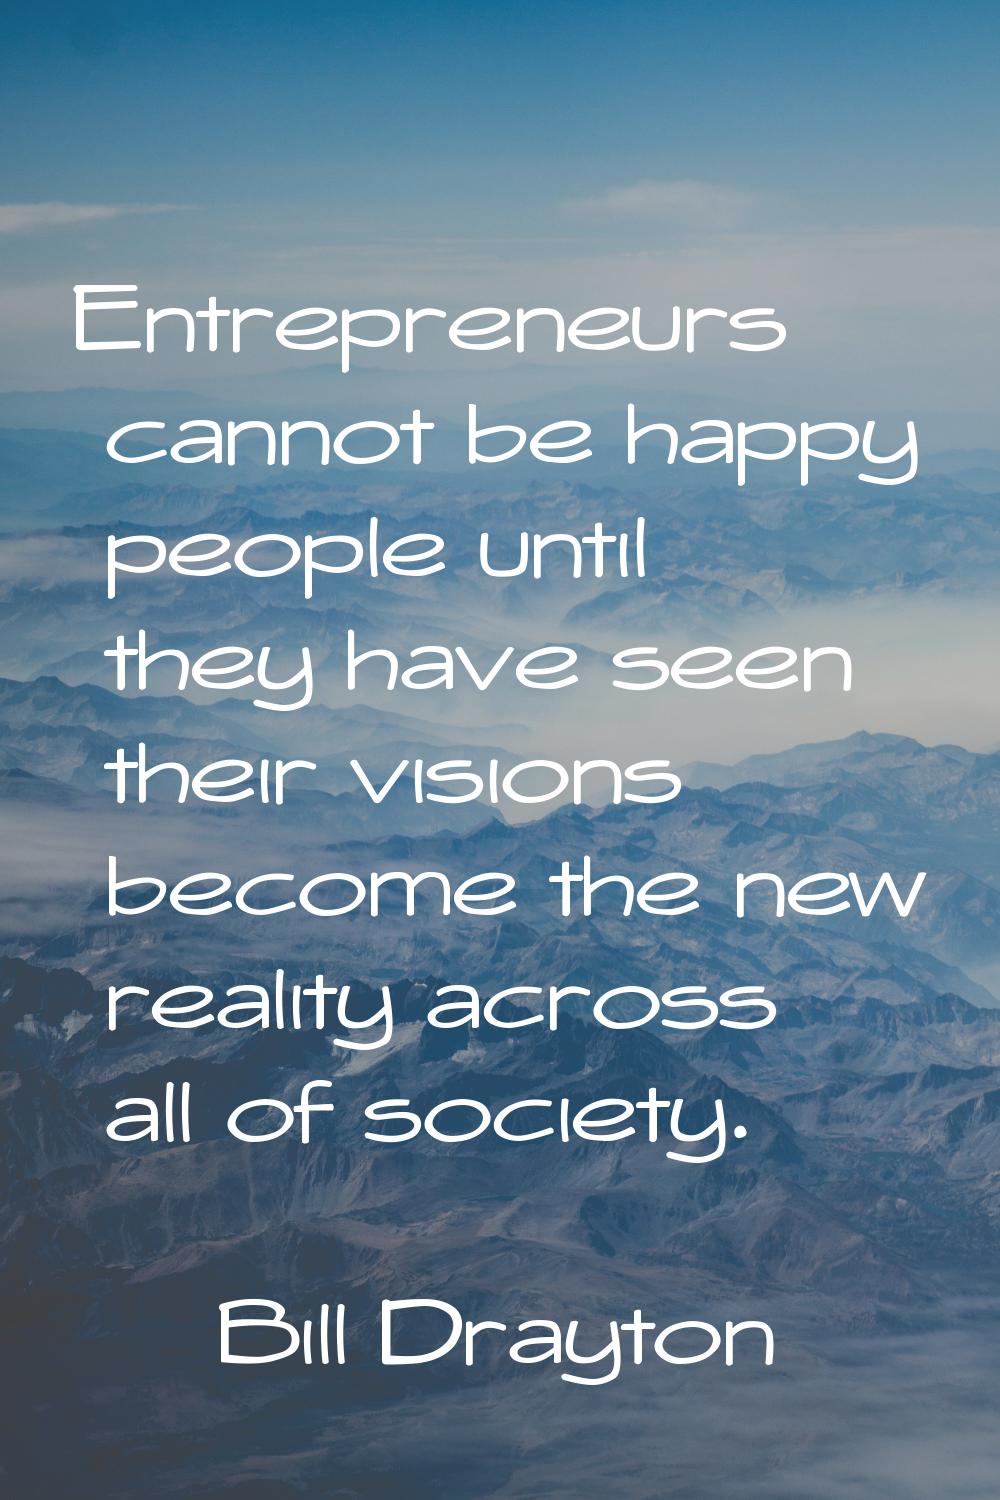 Entrepreneurs cannot be happy people until they have seen their visions become the new reality acro